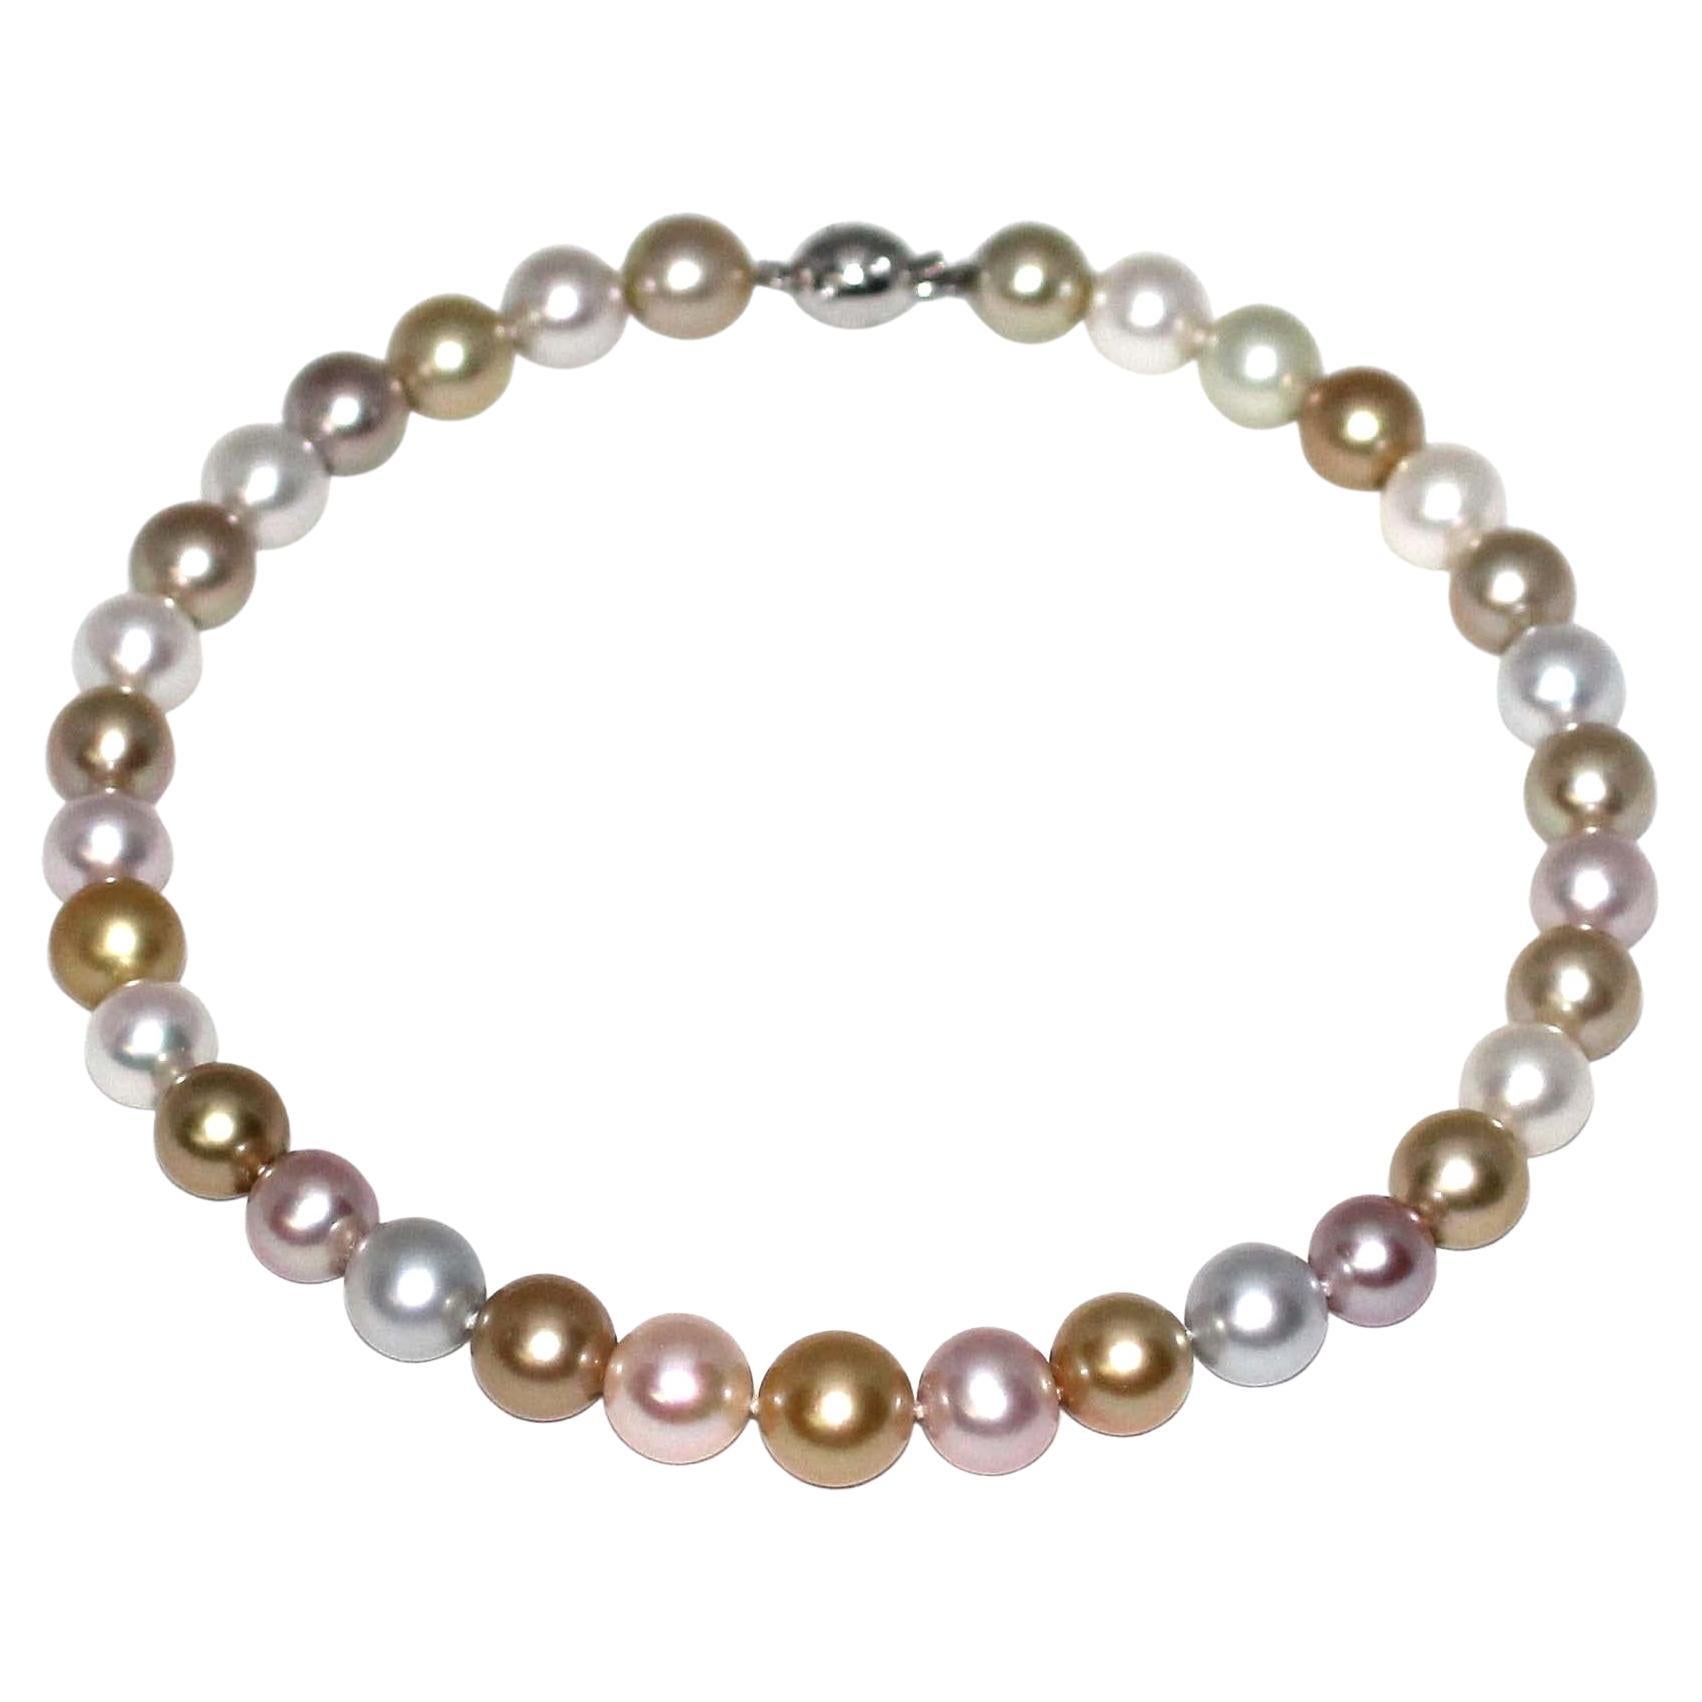 Hakimoto 13x11 mm Fancy Multicolor White, Golden South Sea & Pink pearl Necklace